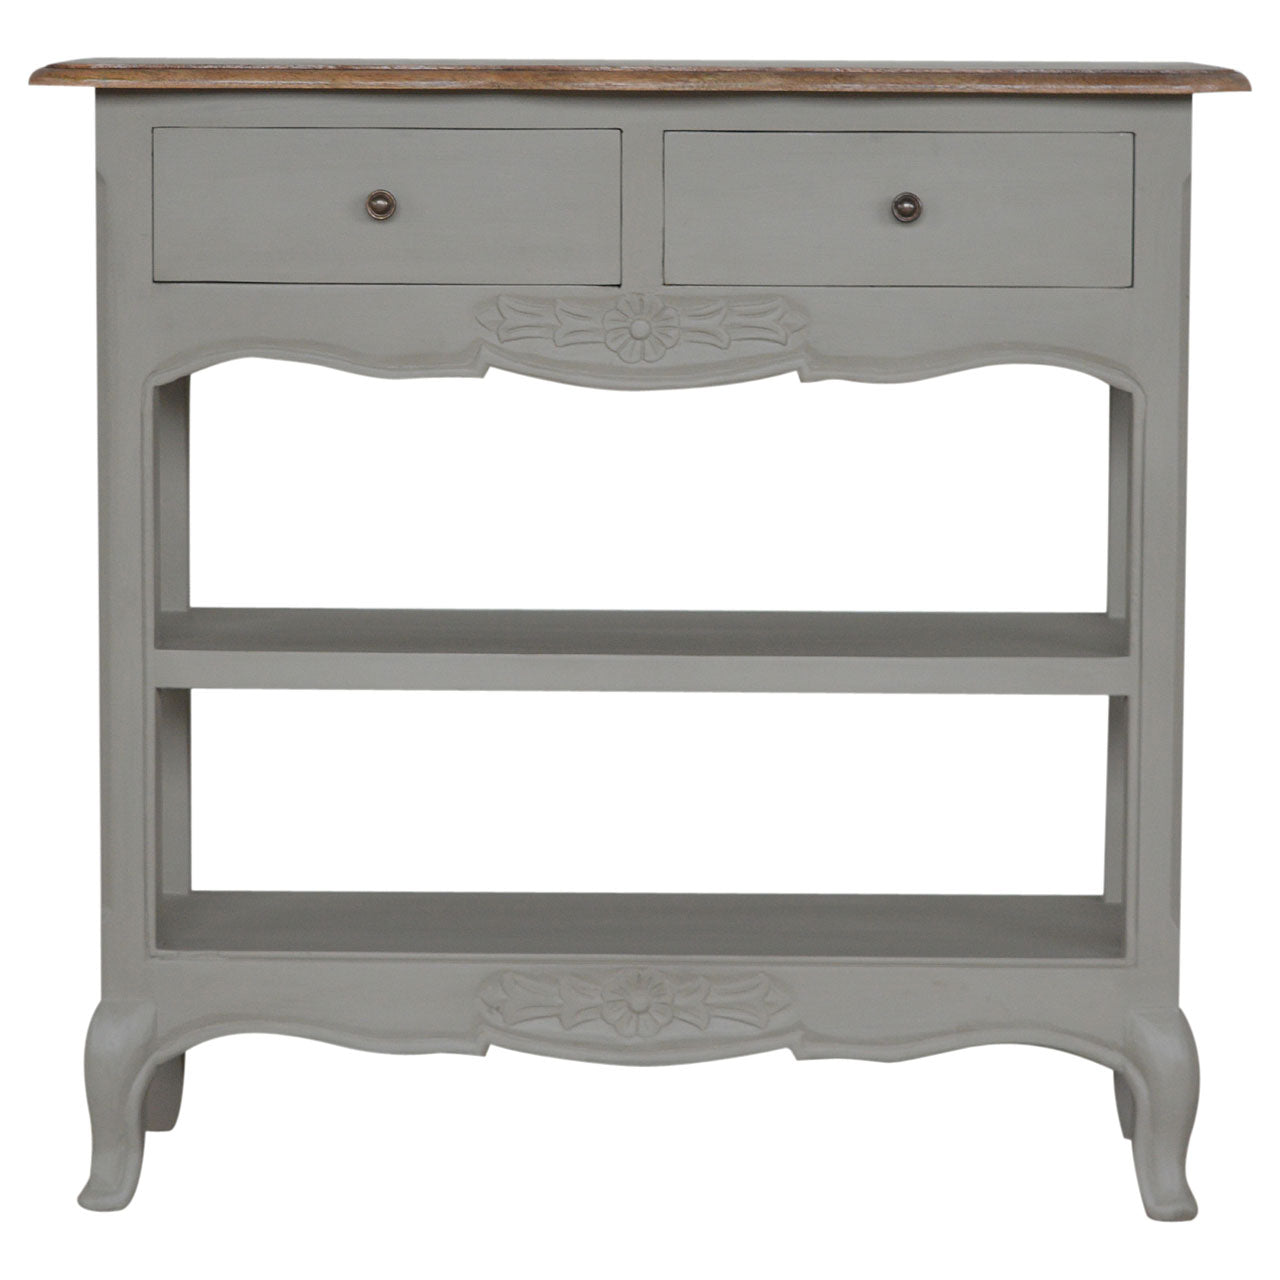 View French Style Console Table information